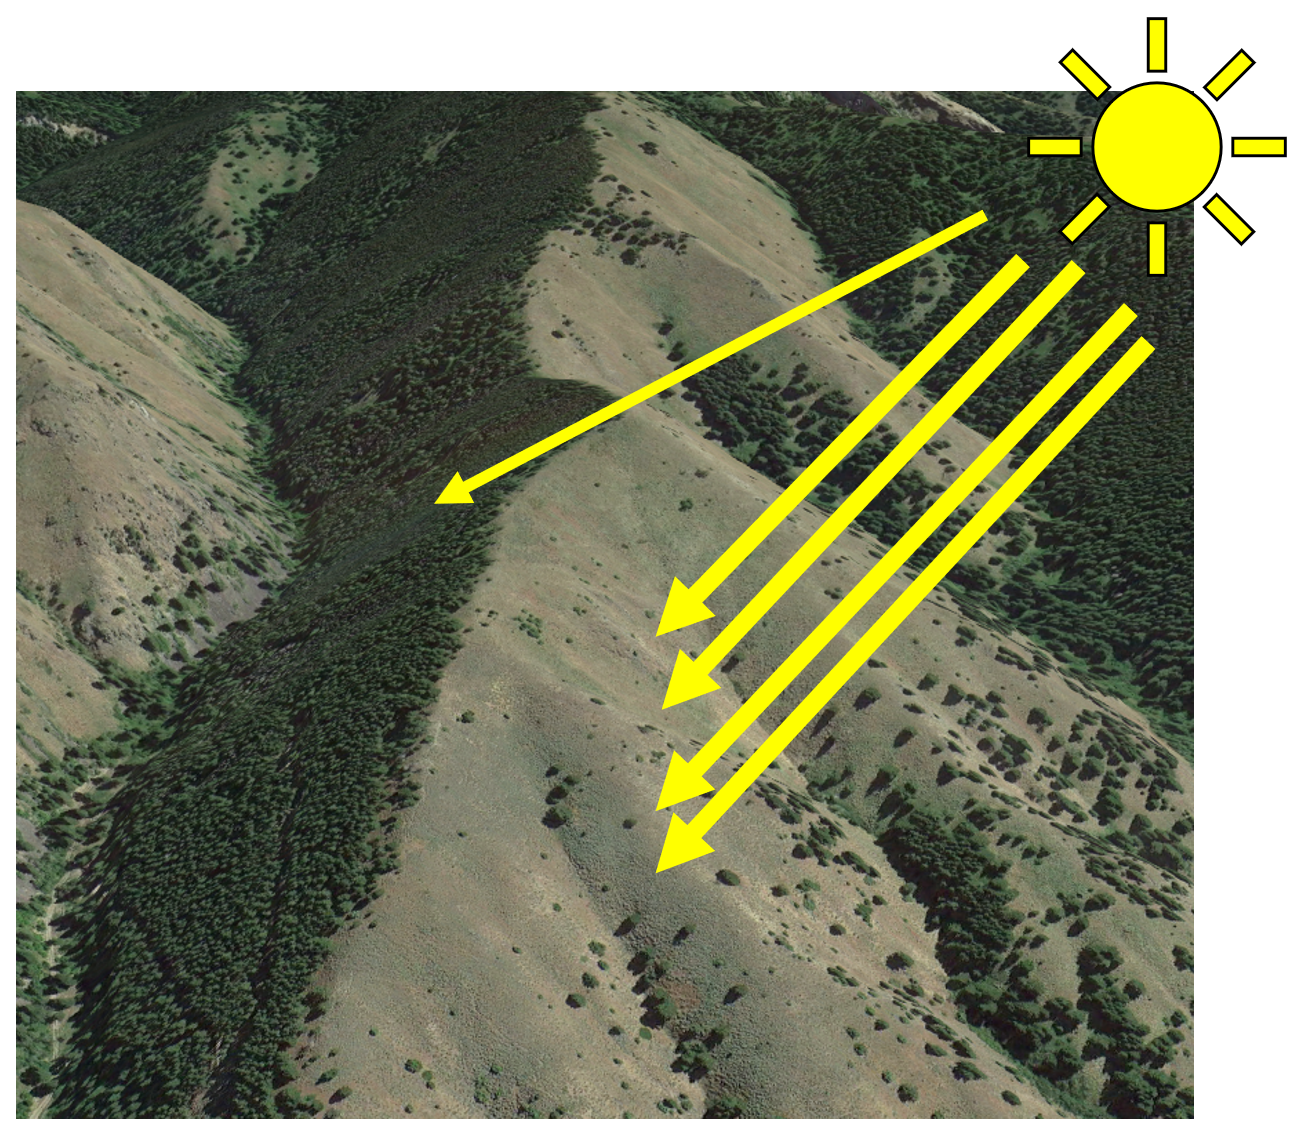 Aerial image of ridgeline with trees on one side and grass on the others. A drawing of a sun is superimposed, with multiple arrows pointing from the sun to the grass and one arrow pointing to the trees